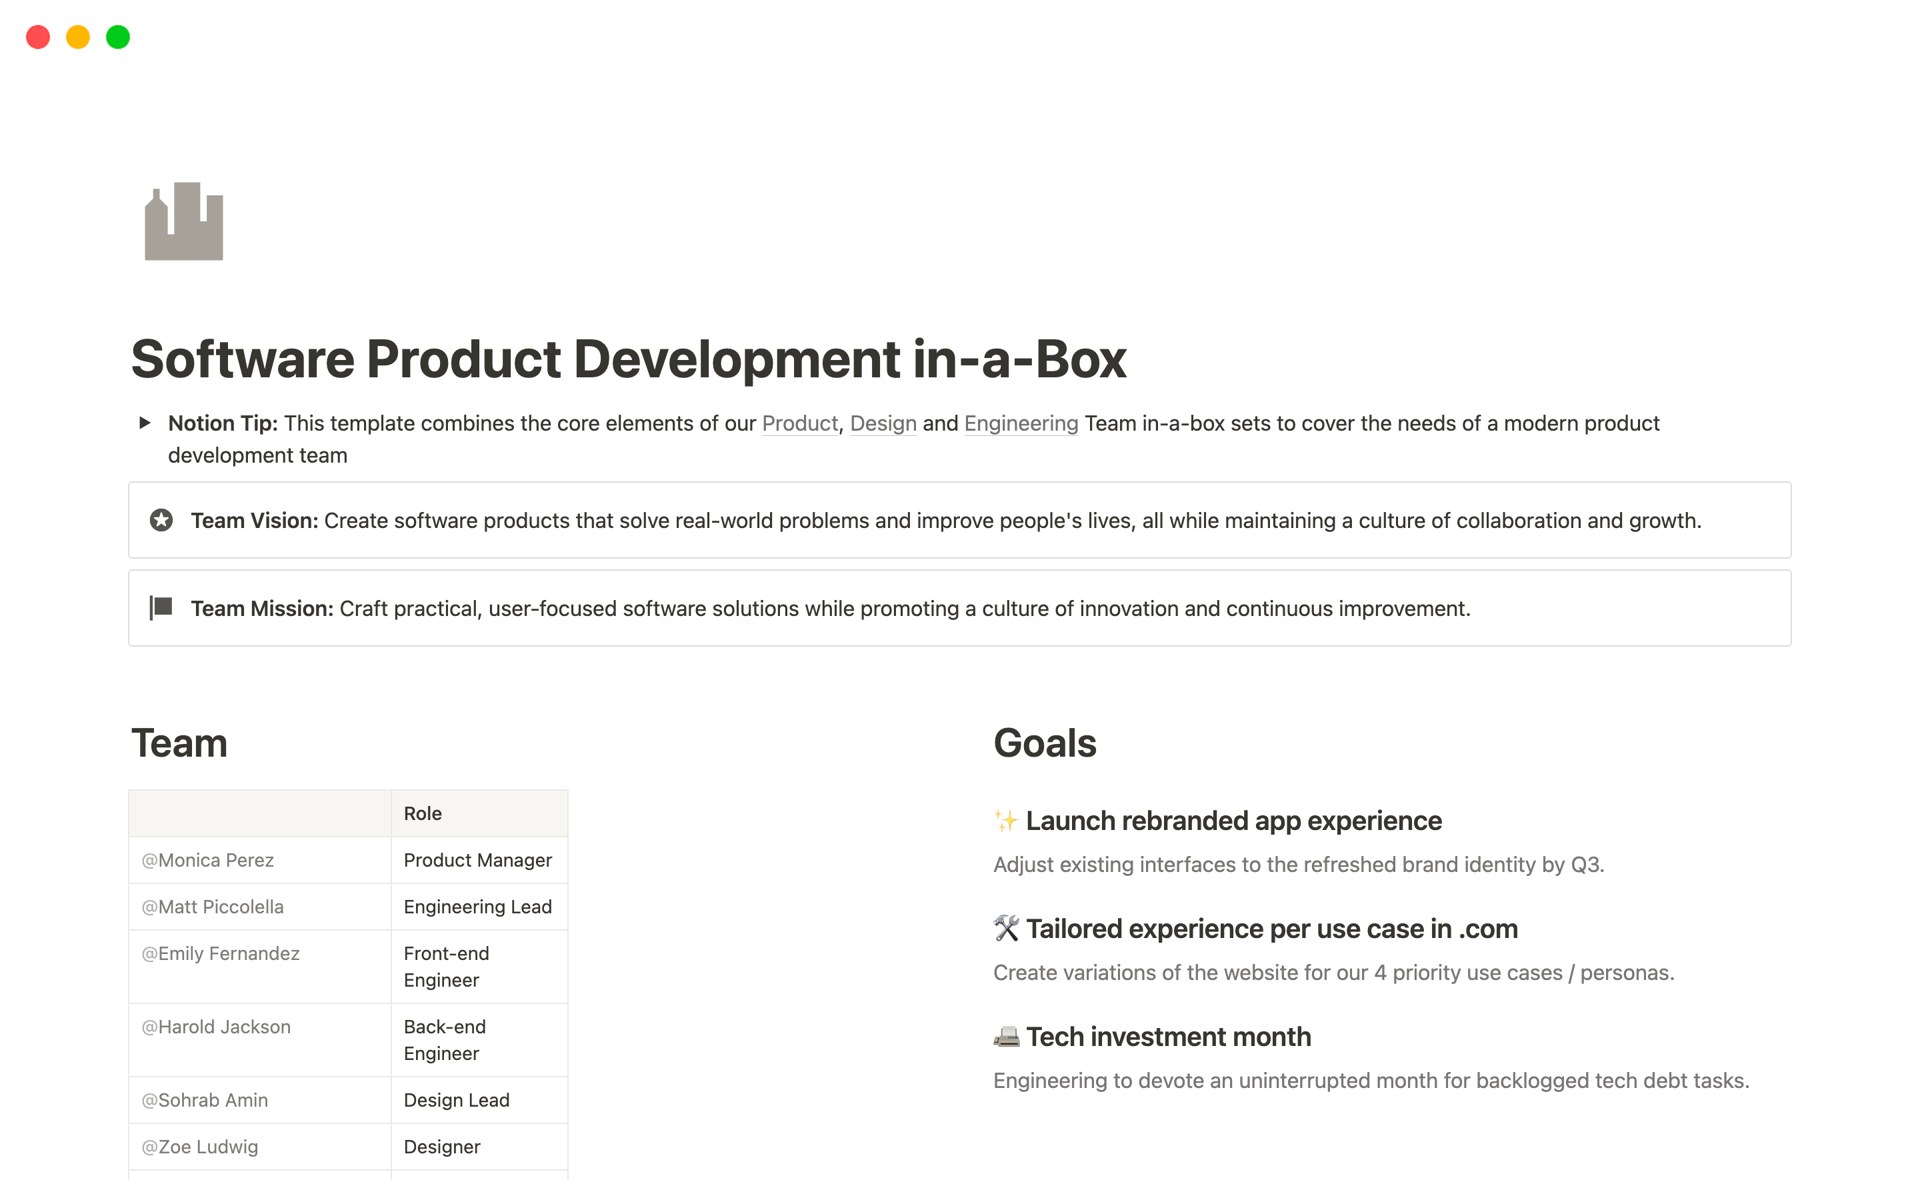 The all-in-one template for modern product development teams.